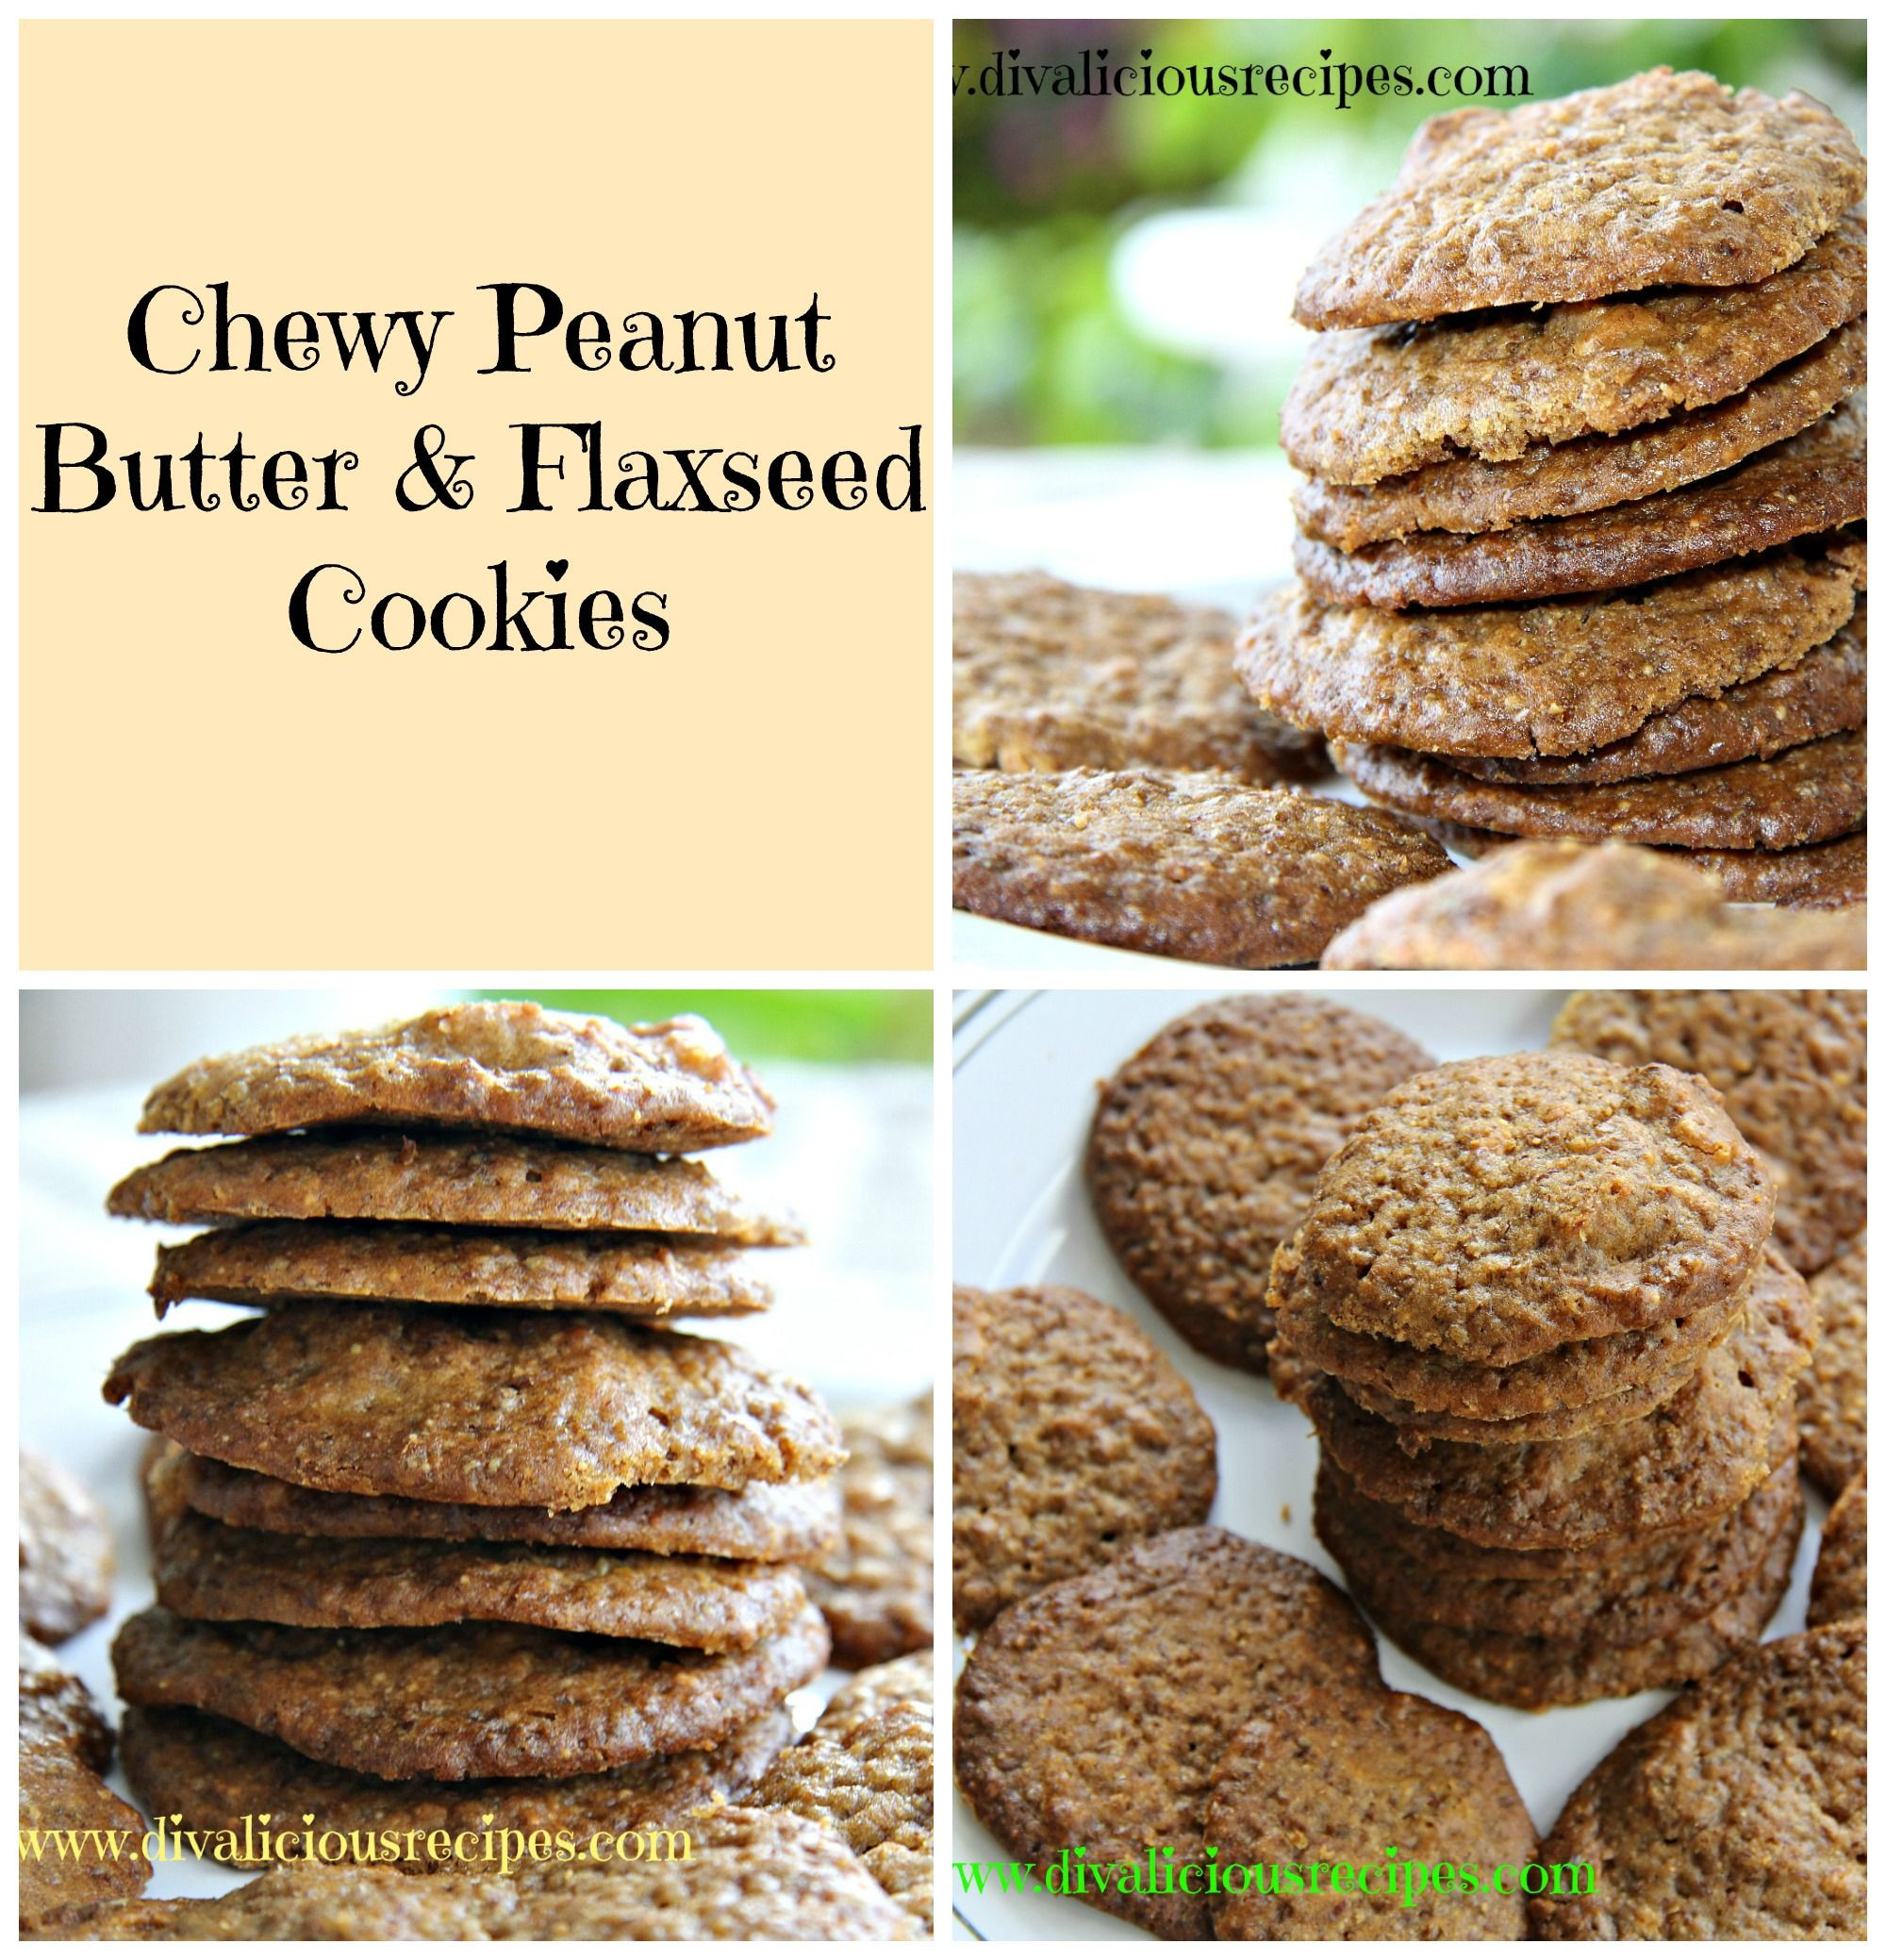 Peanut Butter Cookies No Baking Soda
 Peanut Butter & Flaxseed Cookie Recipe